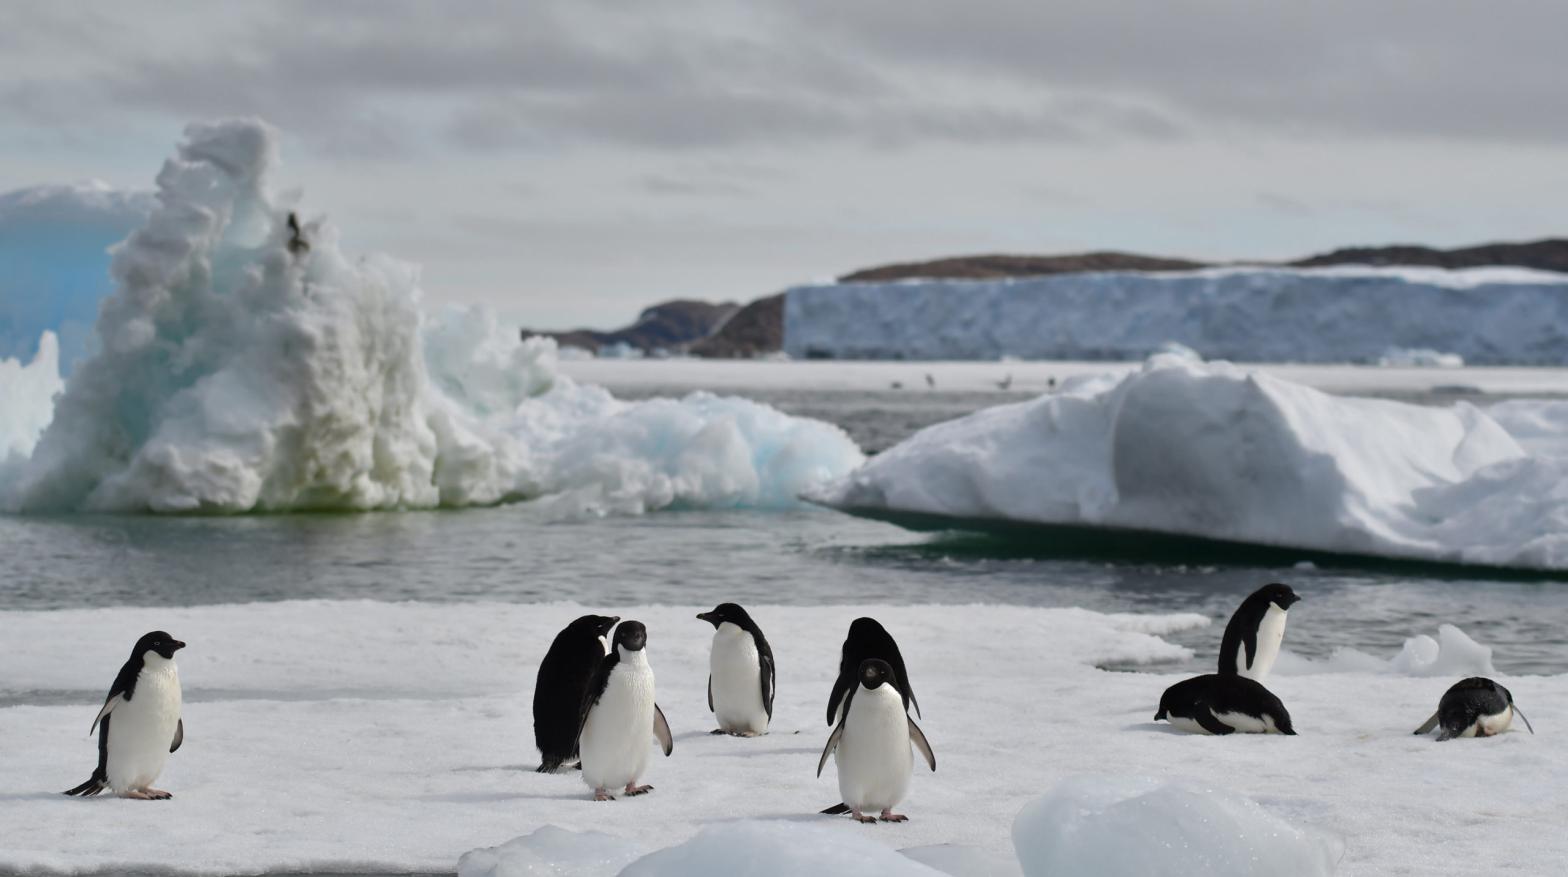 Adélie penguins in Lützow-Holm Bay, Antarctica, enjoy easy access to food and increase body weight and breeding success in ice-free summer. (Photo: Yuuki Watanabe, National Institute of Polar Research, Japan)